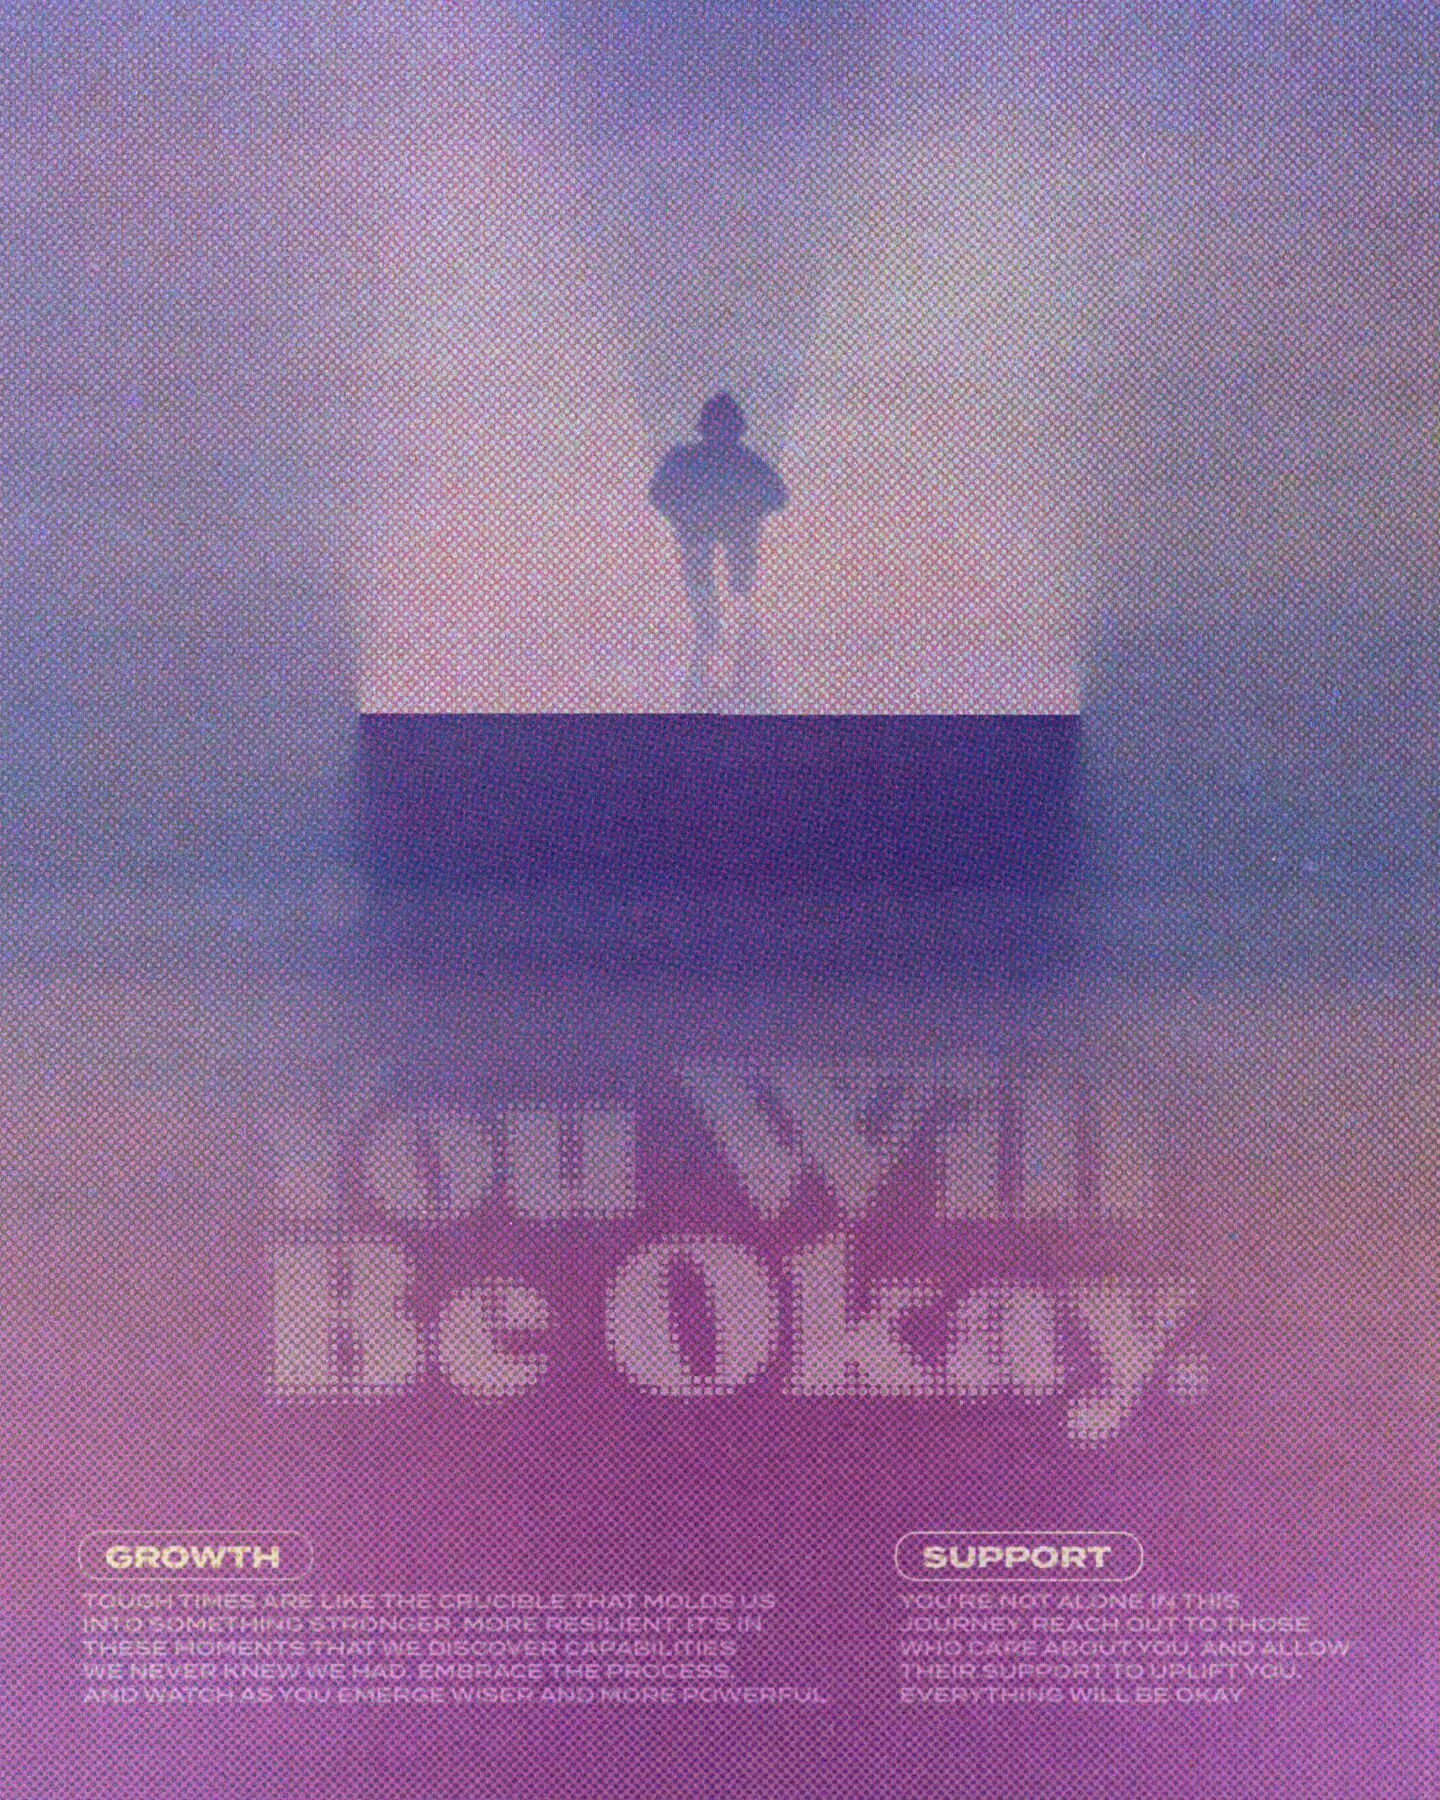 You will be okay.

--

A quick exploration in gradients and texture.

--

#graphicdesign&nbsp;#branding&nbsp;#logodesign&nbsp;#visualidentity&nbsp;#designinspiration&nbsp;#creativelifehappylife&nbsp;#designerlife&nbsp;#brandidentity&nbsp;#logodesigne